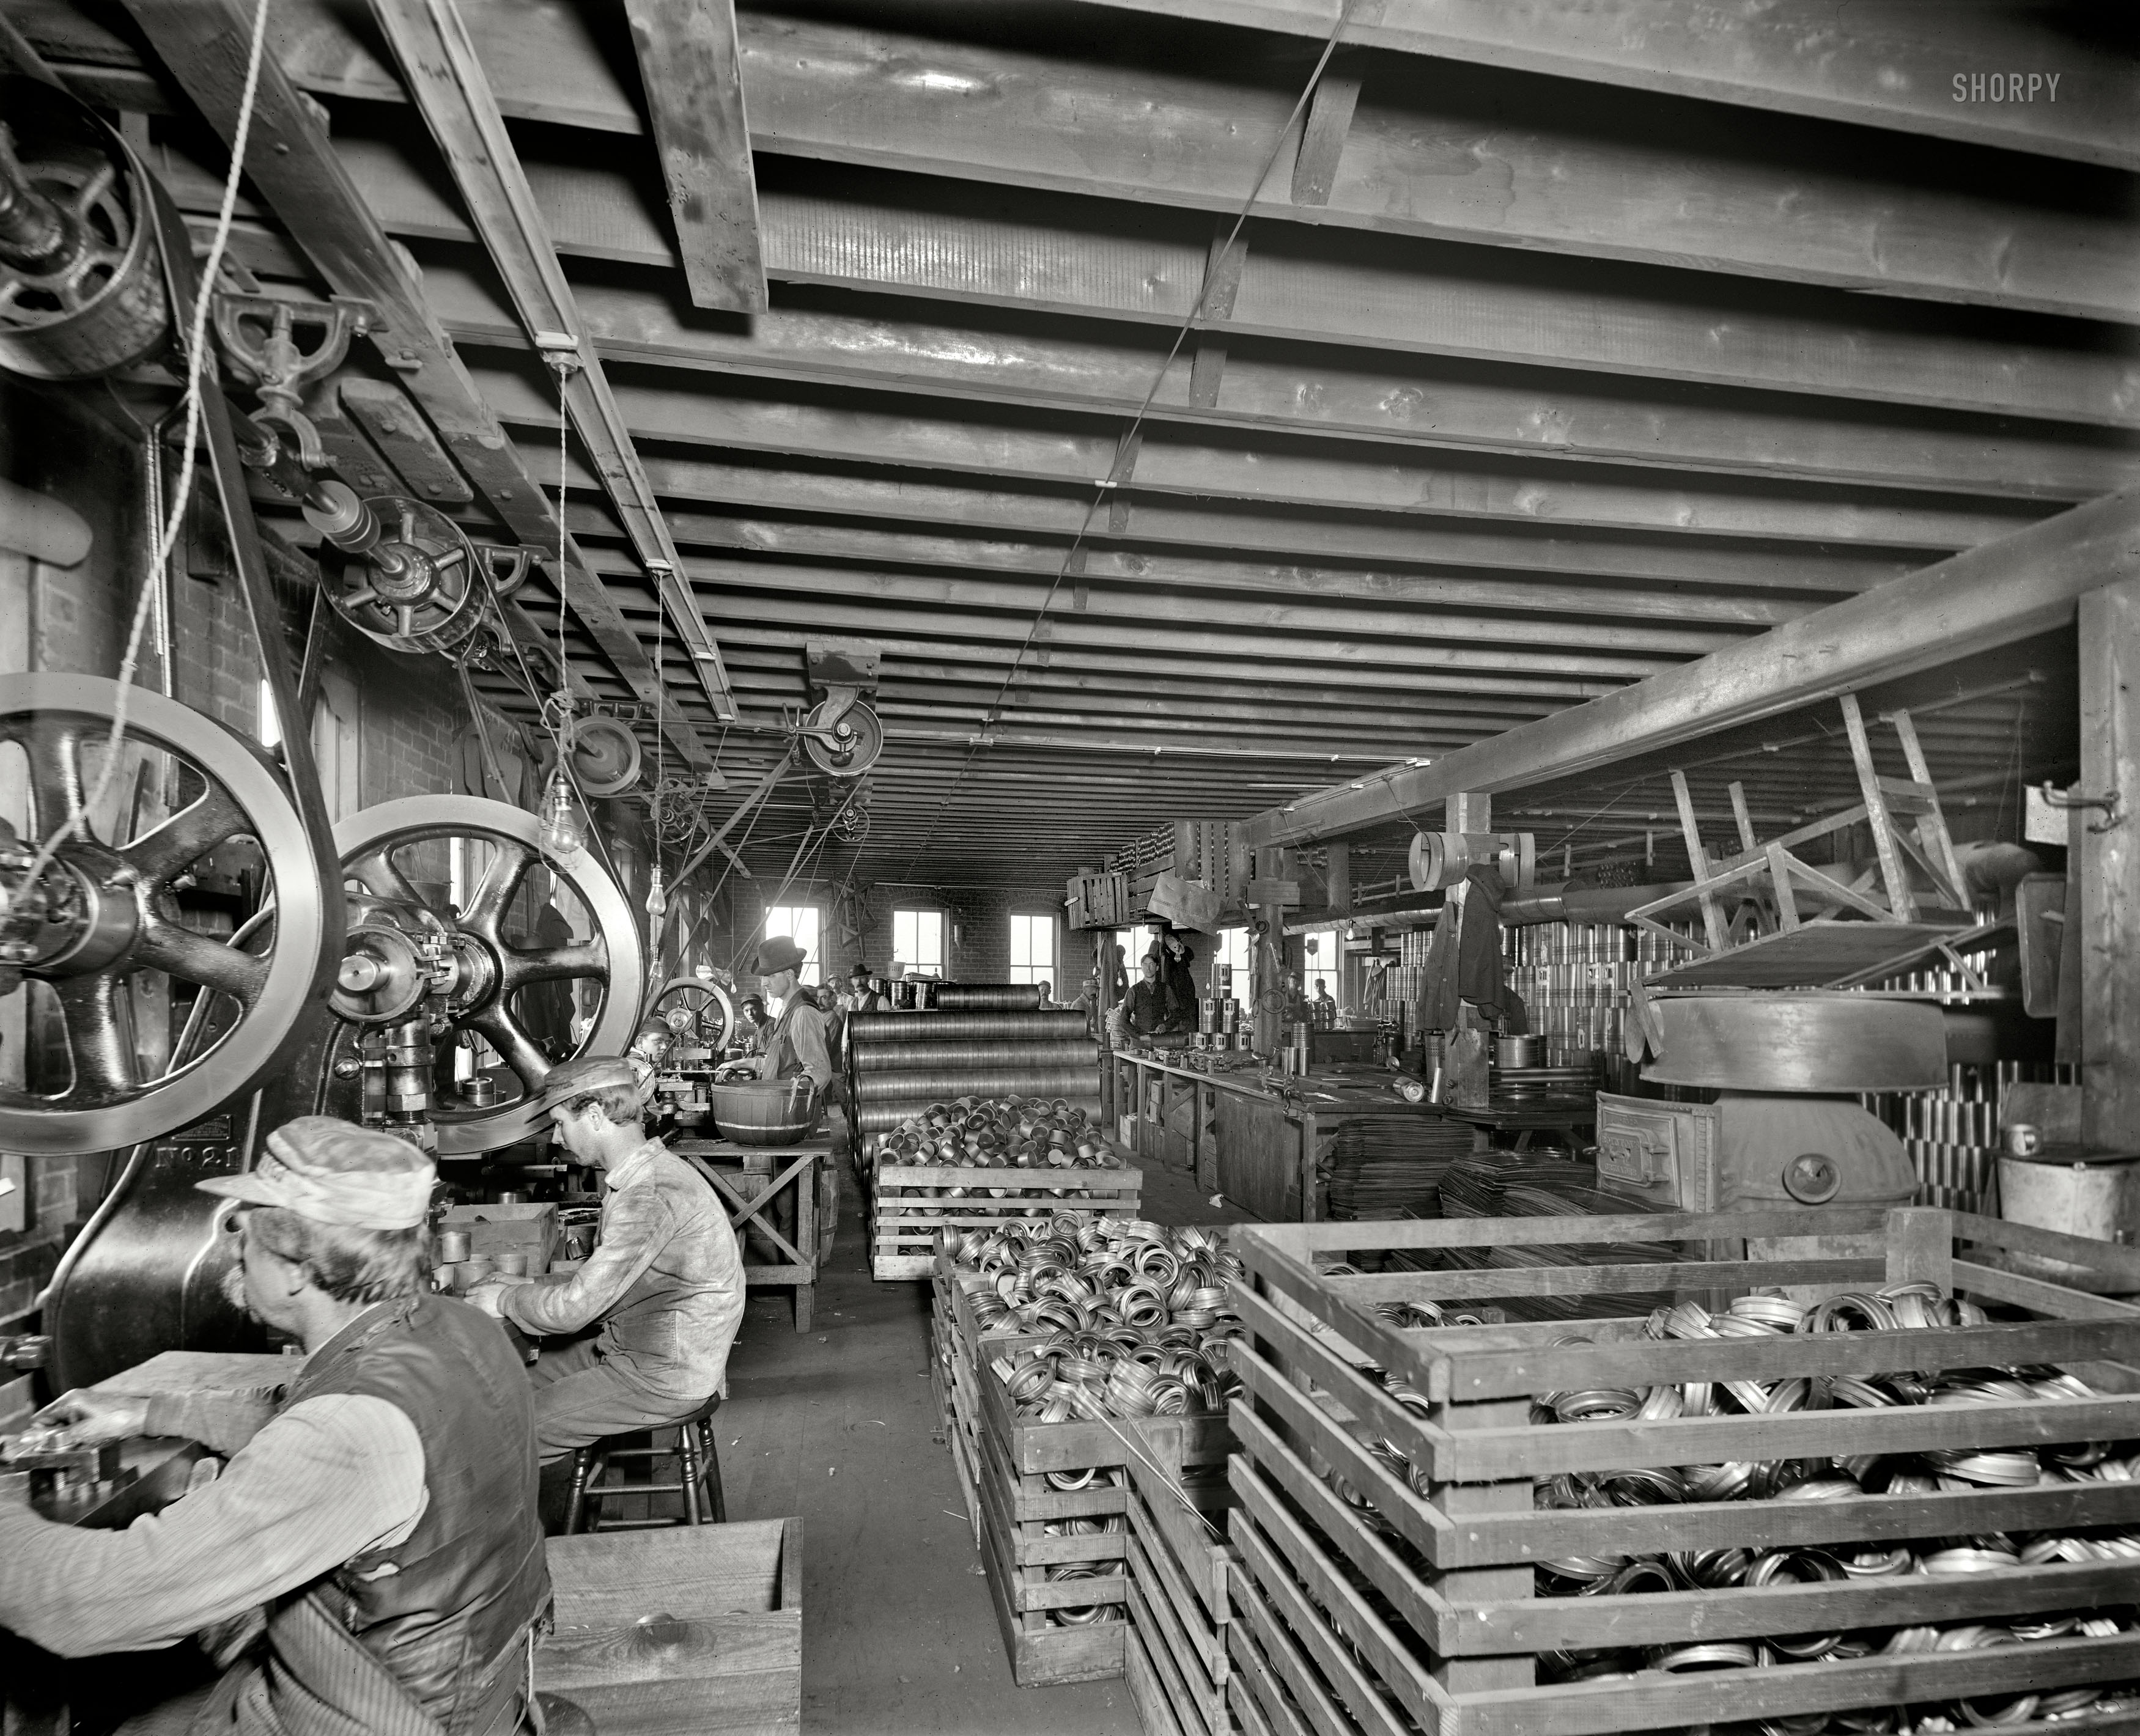 Chelsea, Michigan, circa 1901. "Glazier Stove Co., tank room." Yet another glimpse of the inner workings at Glazier Stove. 8x10 glass negative. View full size.